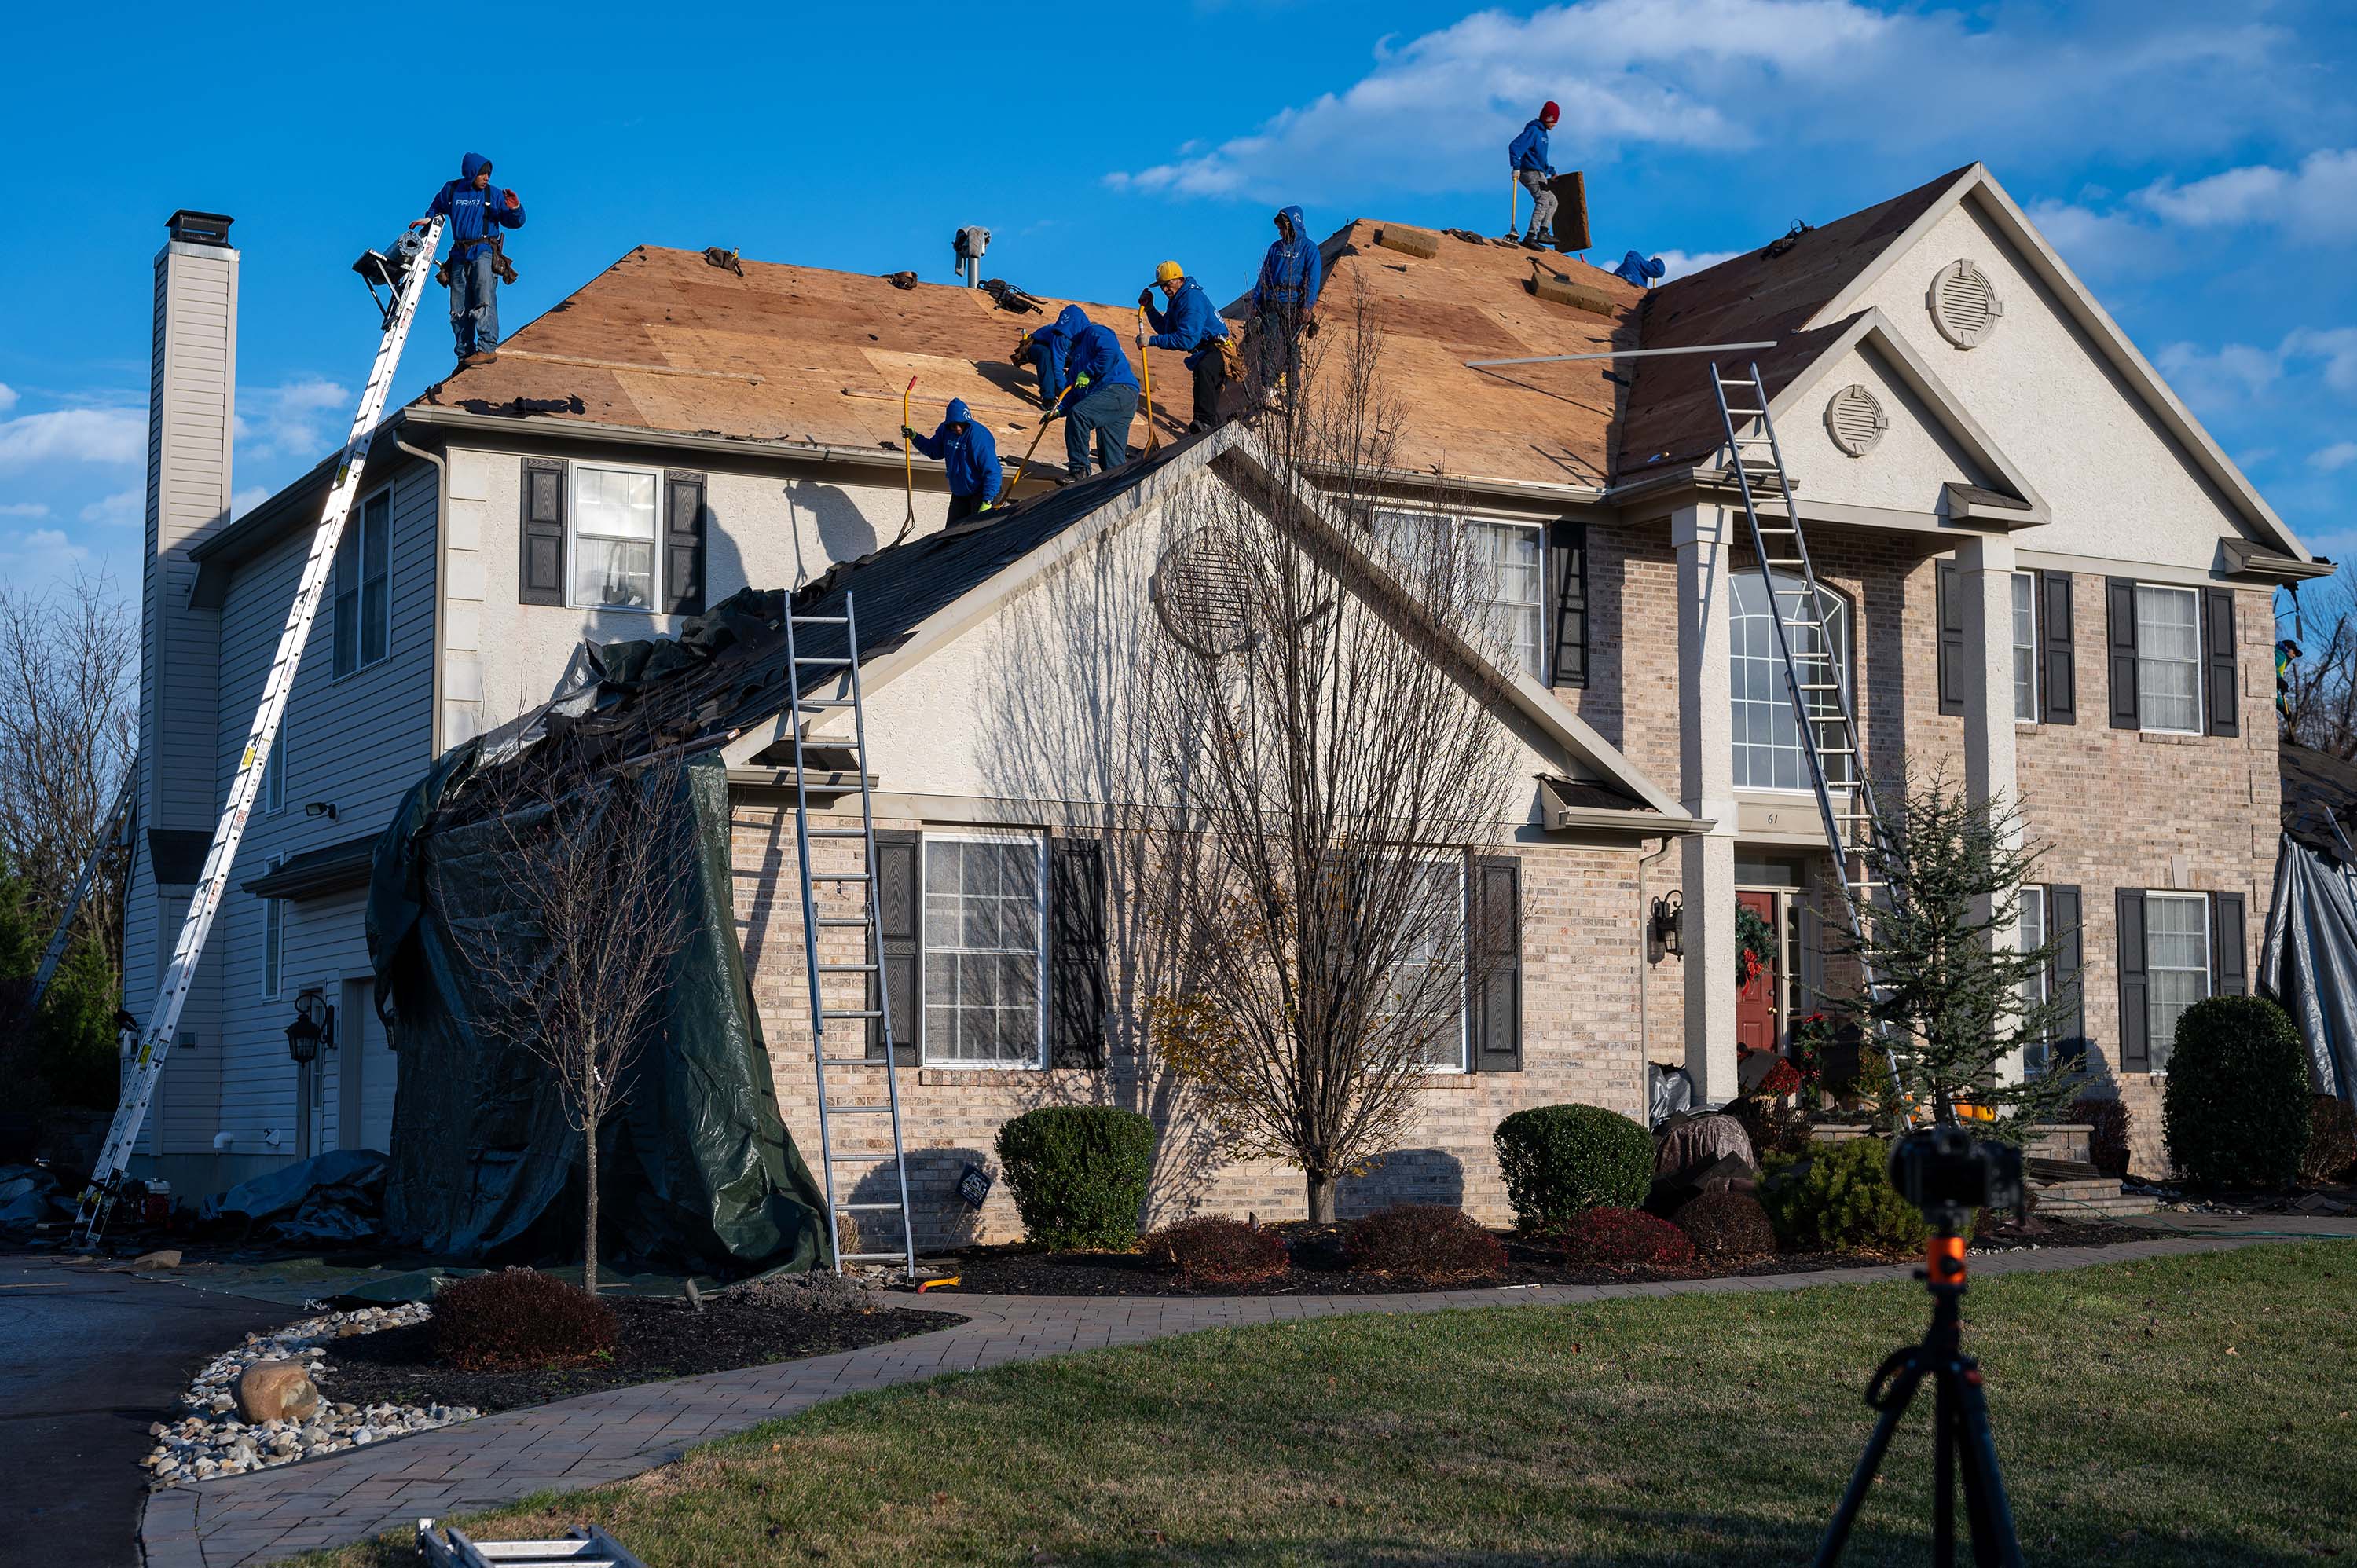 Yardley Roofing repair company - residential roofing contractors in Yardley, PA (large image)